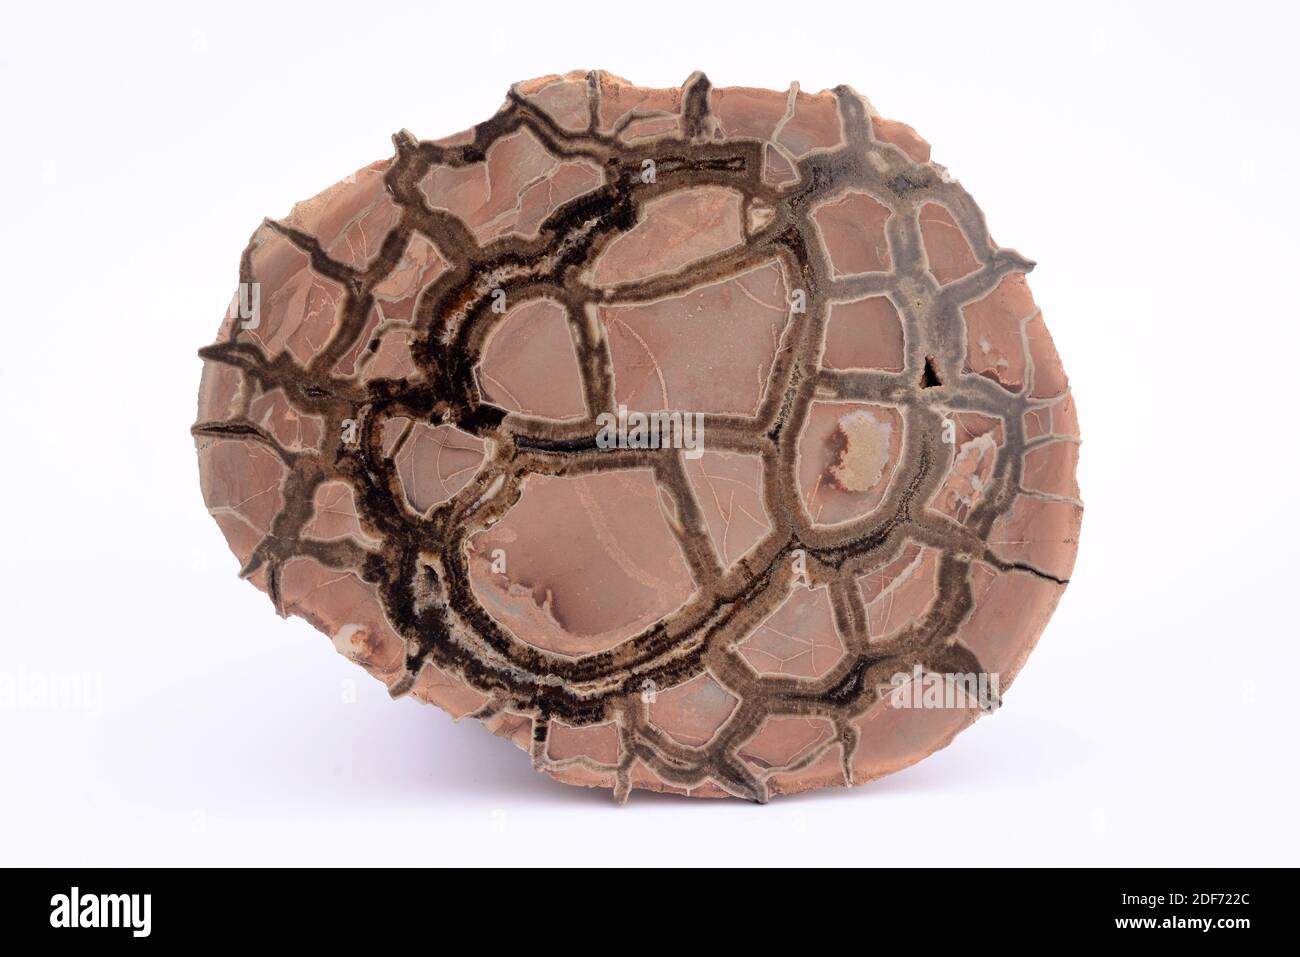 Septarium section showing calcite stuffed cracks. This sample comes to Madagascar. Stock Photo